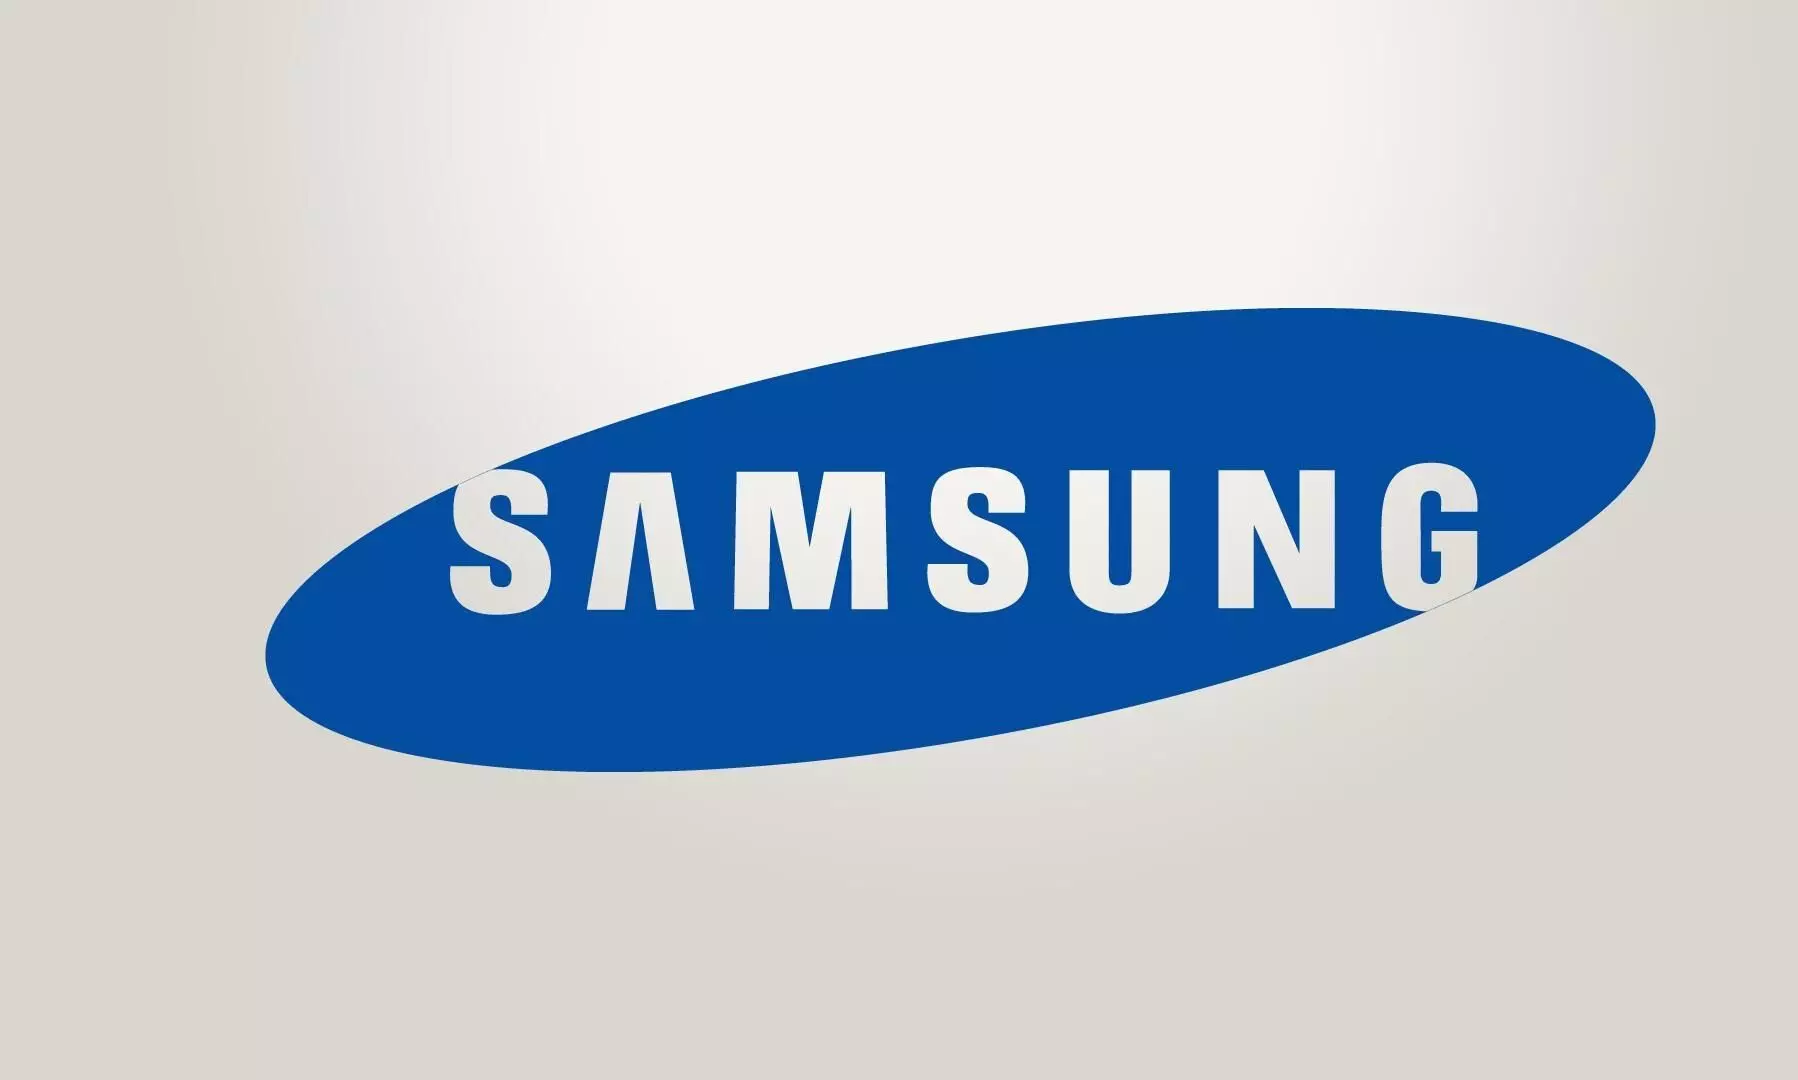 Samsung tops overall India handset market with 17% share